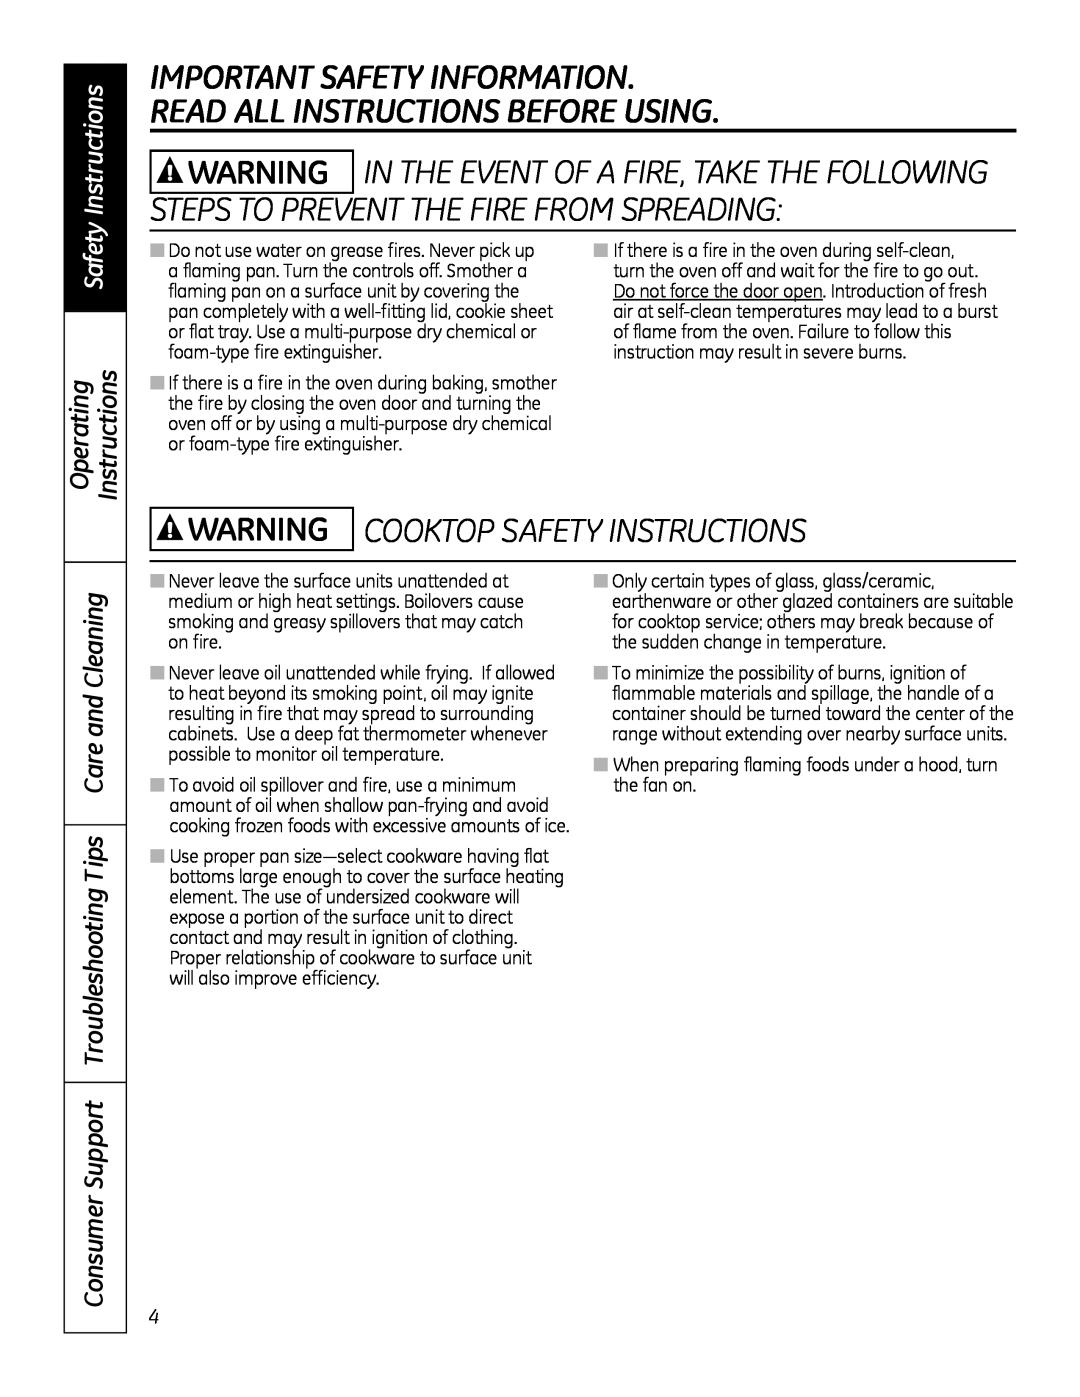 GE JBP28DRCC, 49-80591-2 owner manual WARNING COOKTOP SAFETY INSTRuCTIONS, Safety, Operating Instructions 